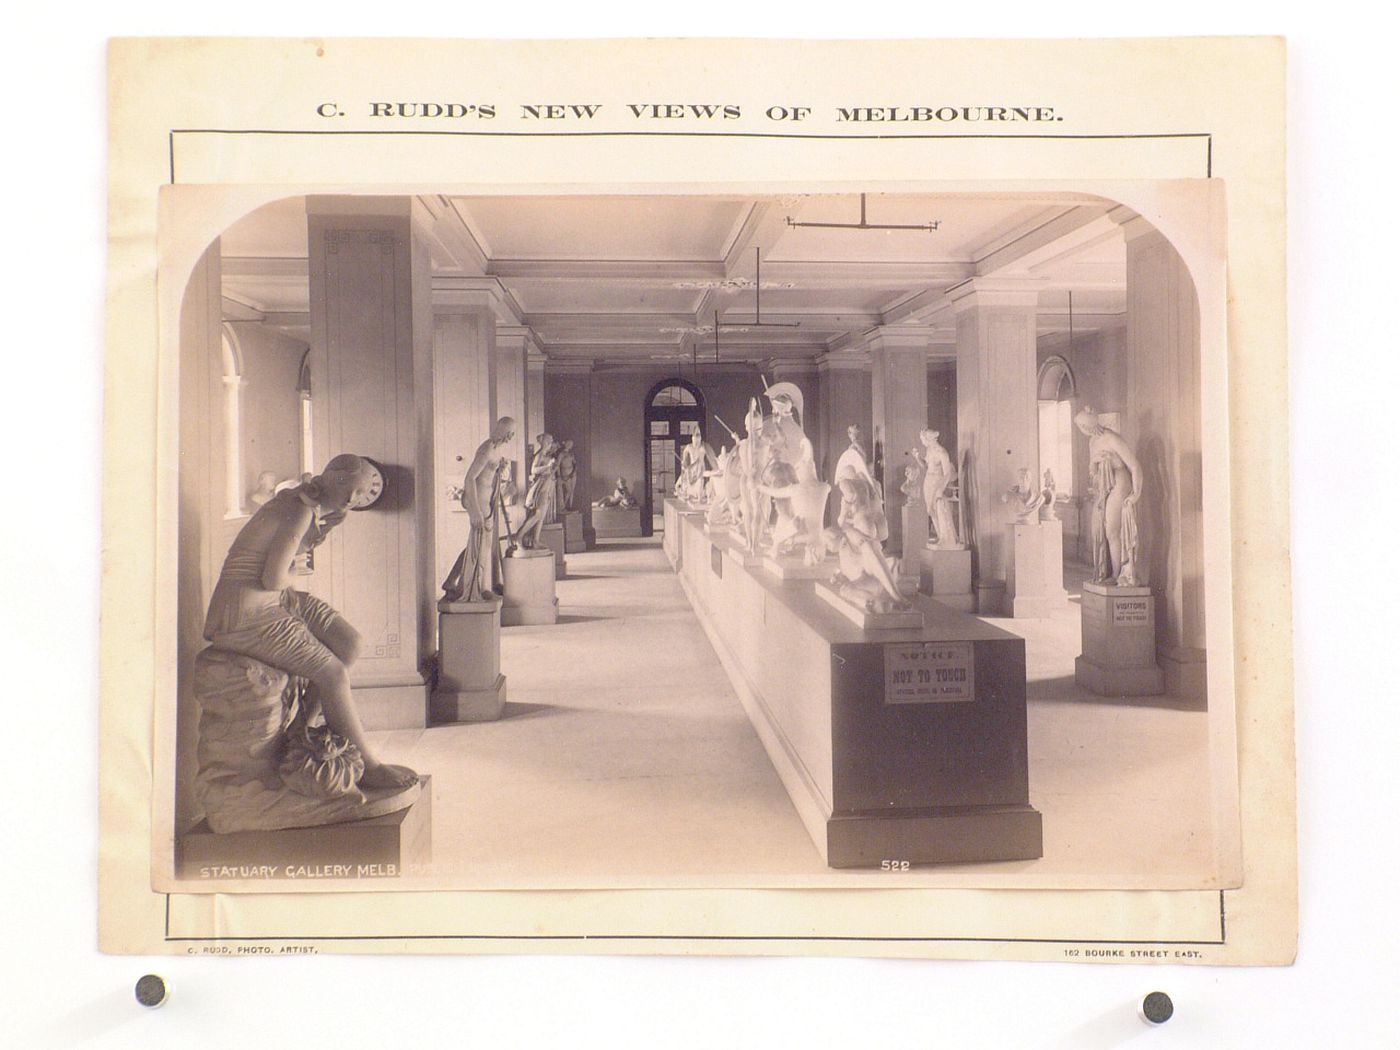 Interior view of the Statuary Gallery of Melbourne Public Library (now the State Library of Victoria), Australia